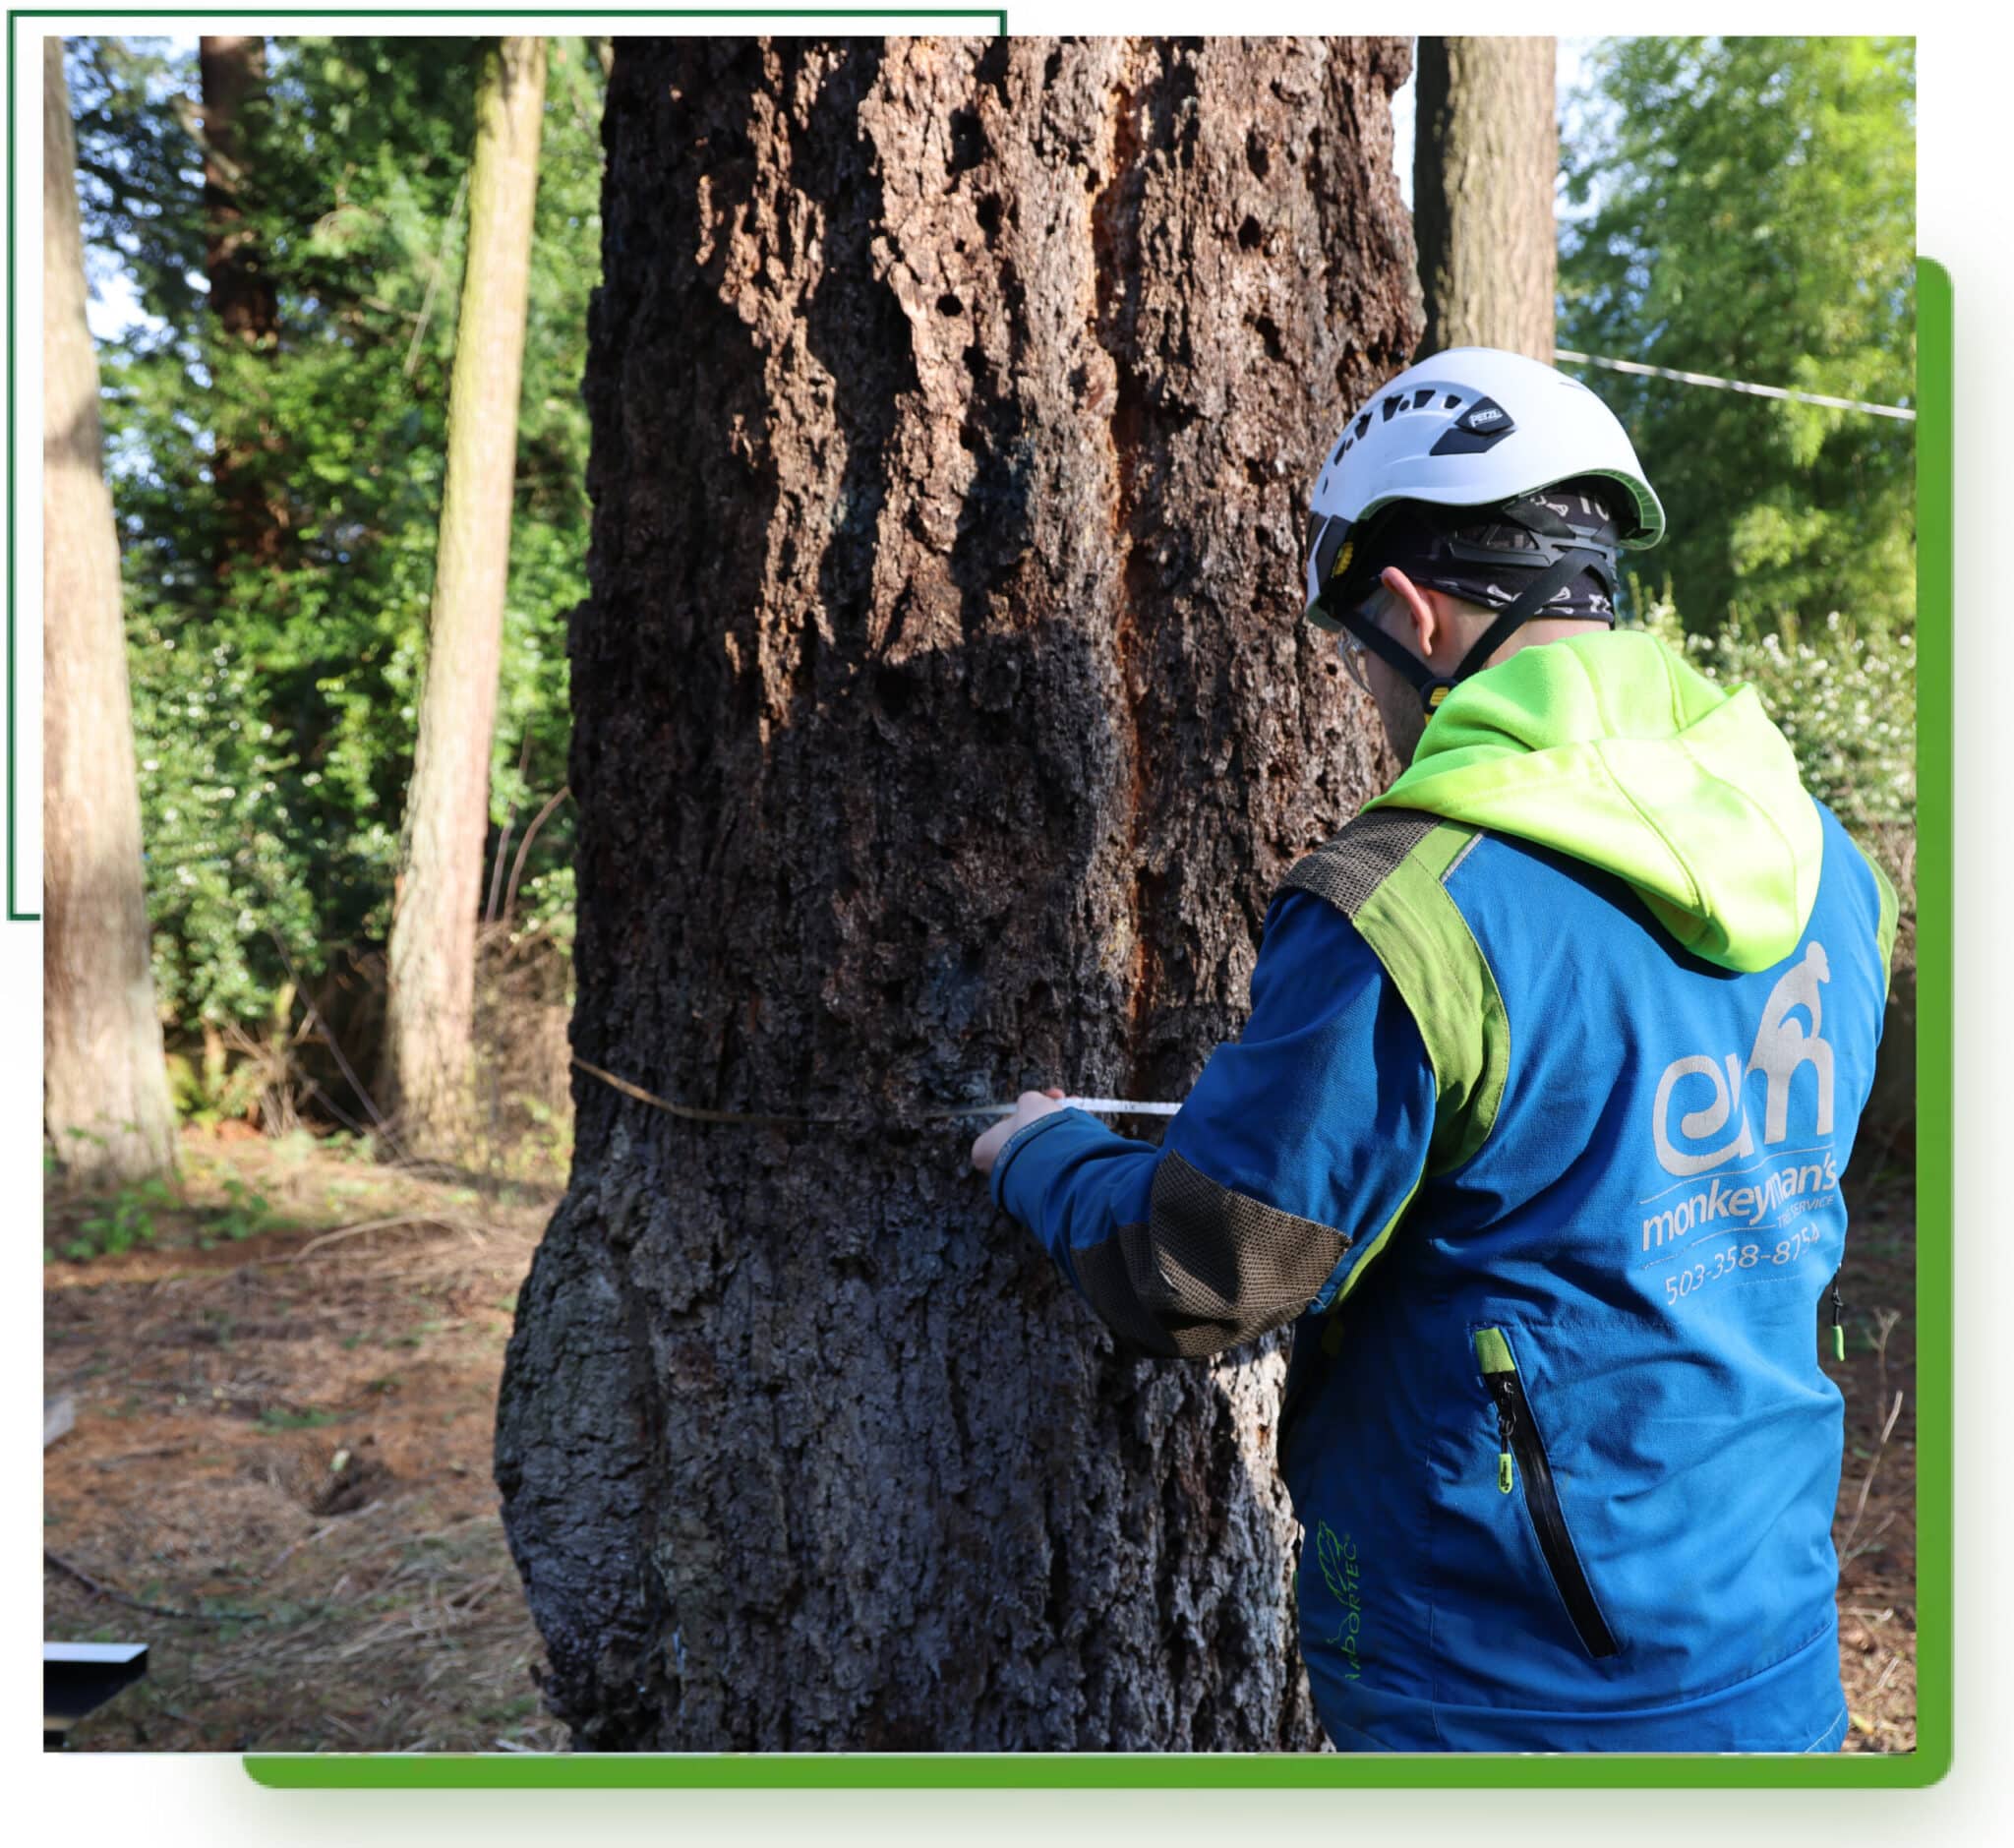 Certified Arborist doing a plant health care assessment on a native Douglas-fir tree.